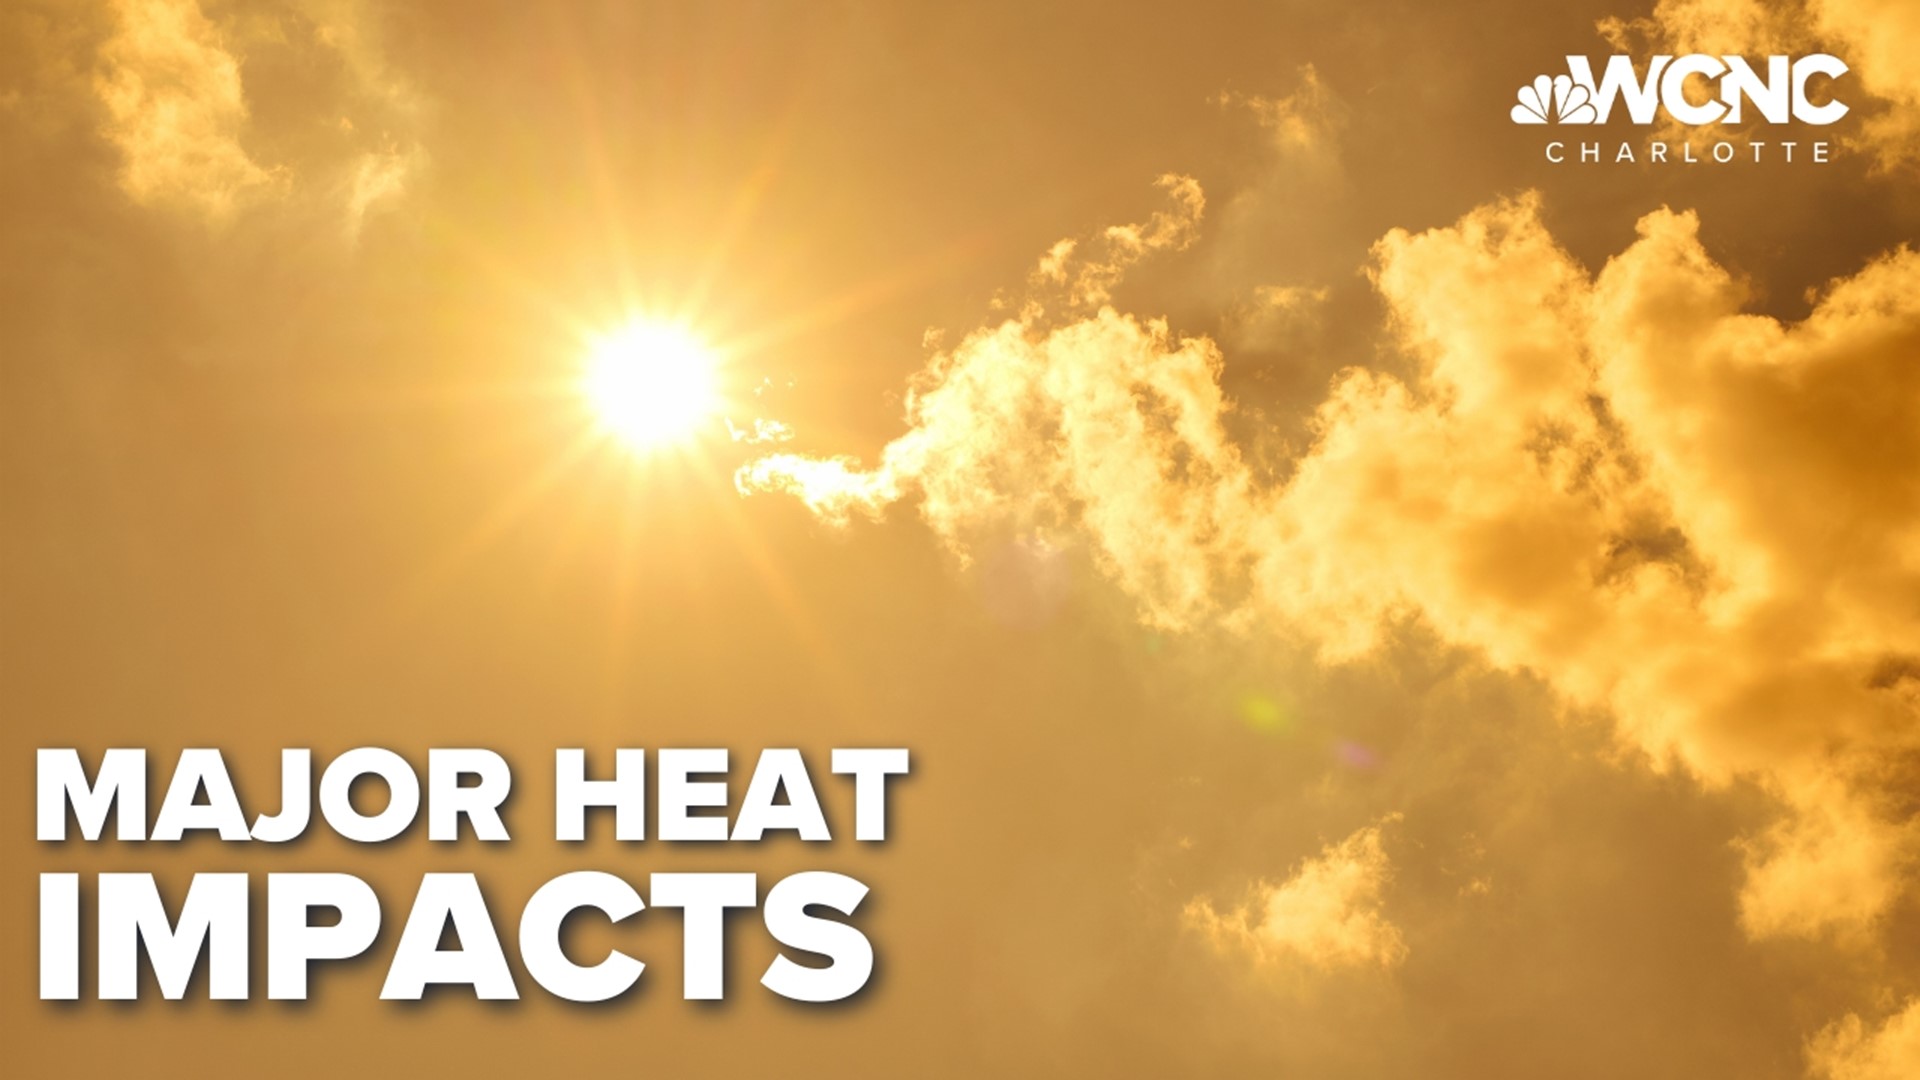 If you are outside, make sure to check in with yourself for signs of heat stroke or other heat related impacts.